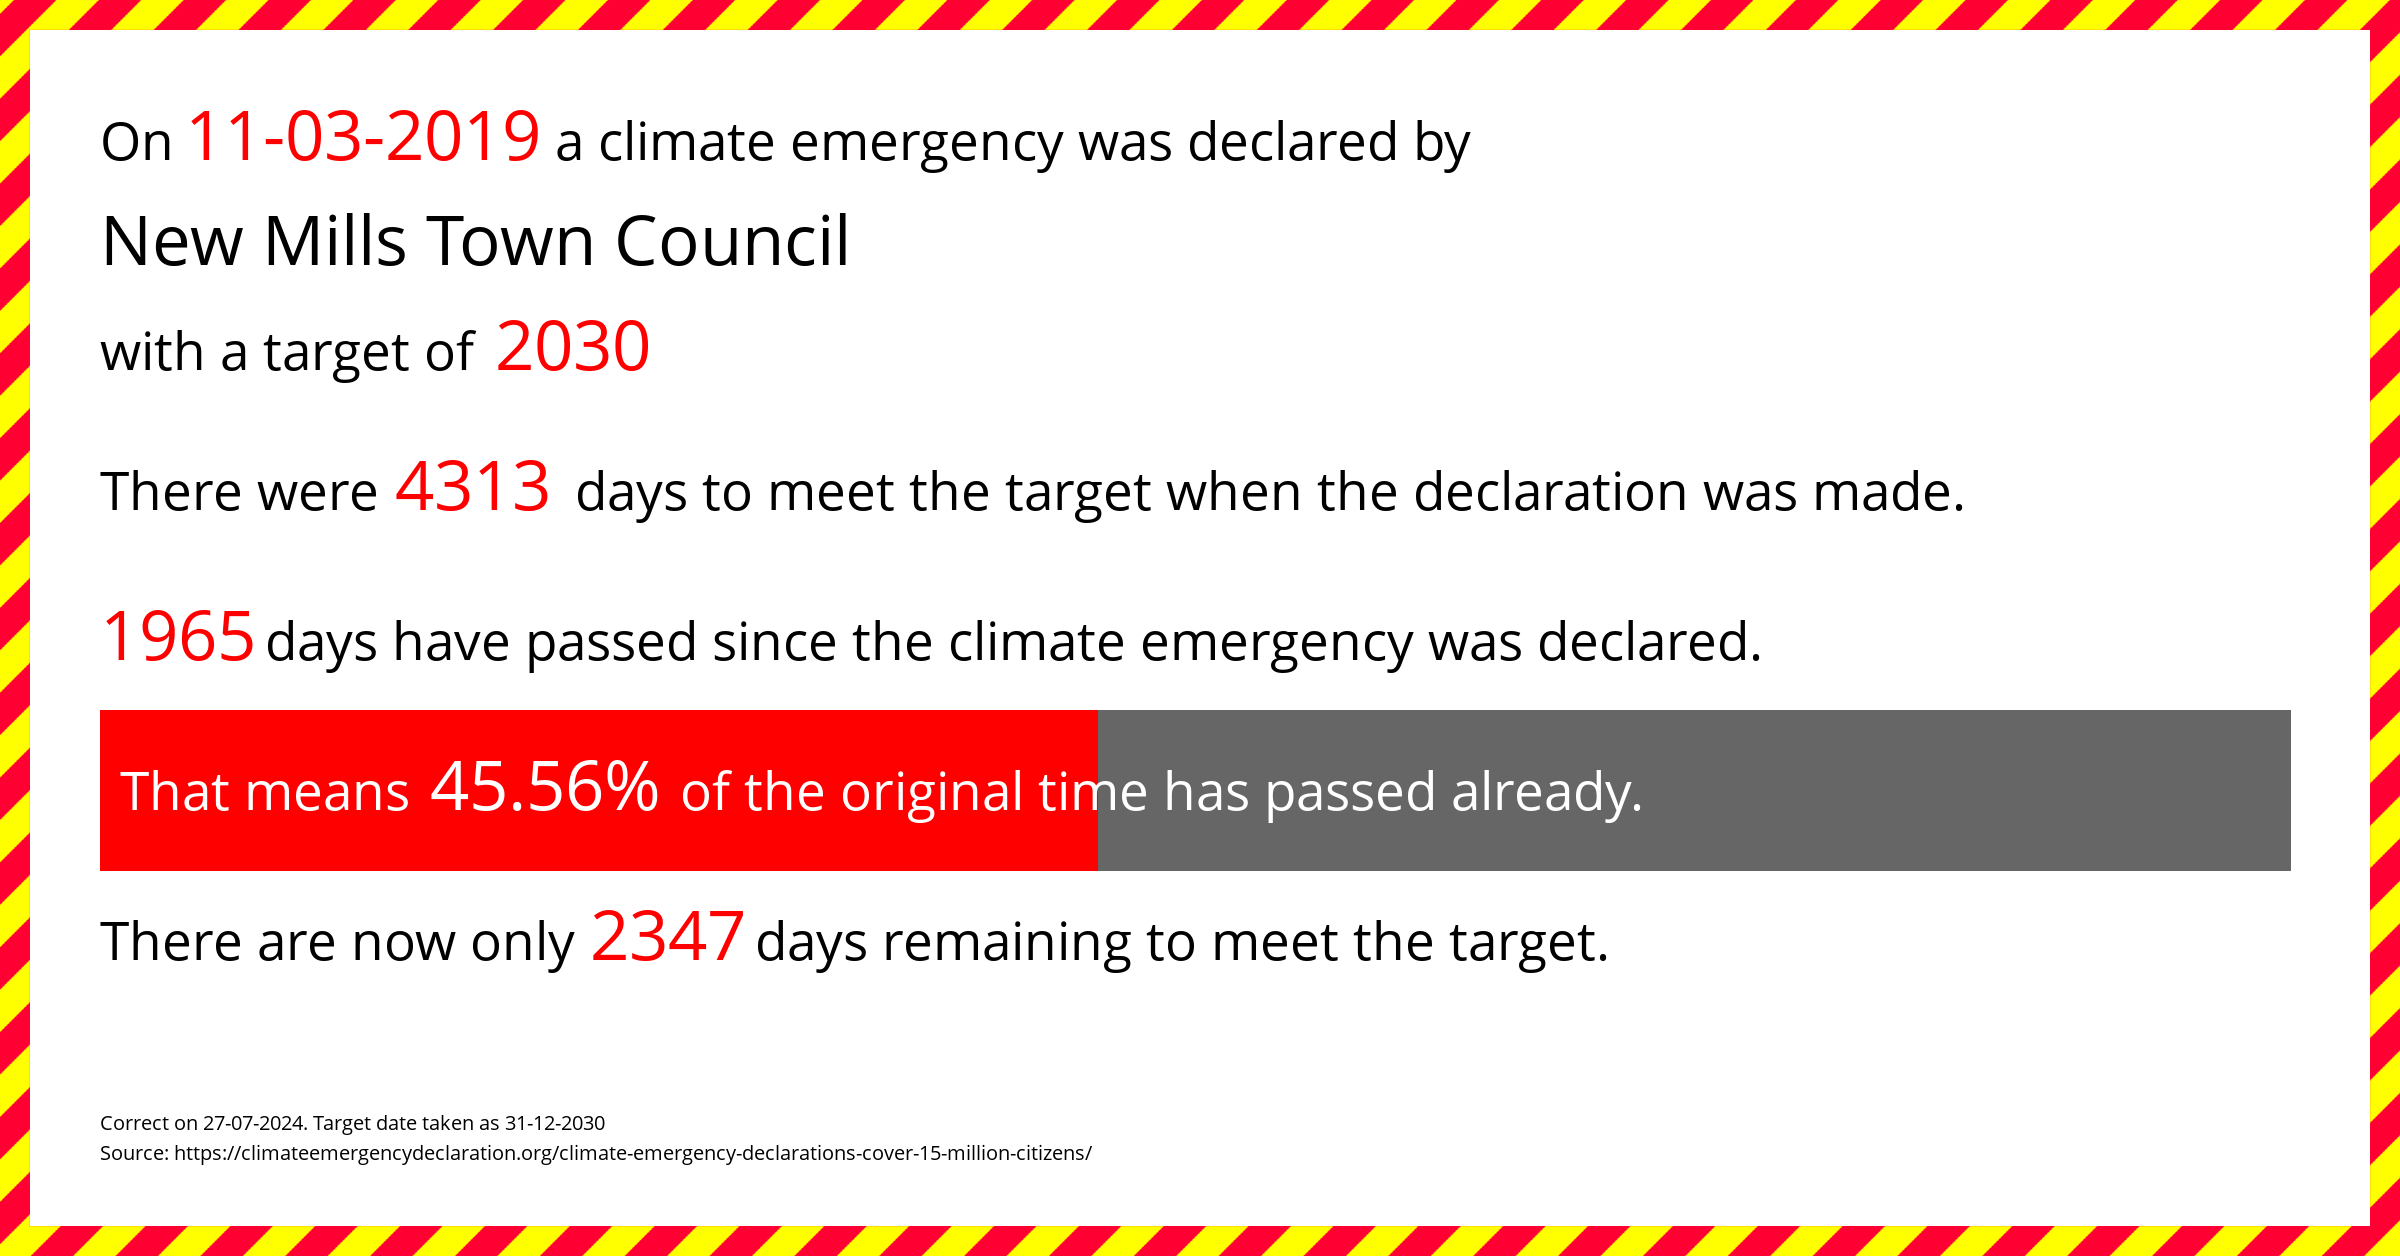 New Mills Town Council  declared a Climate emergency on Monday 11th March 2019, with a target of 2030.